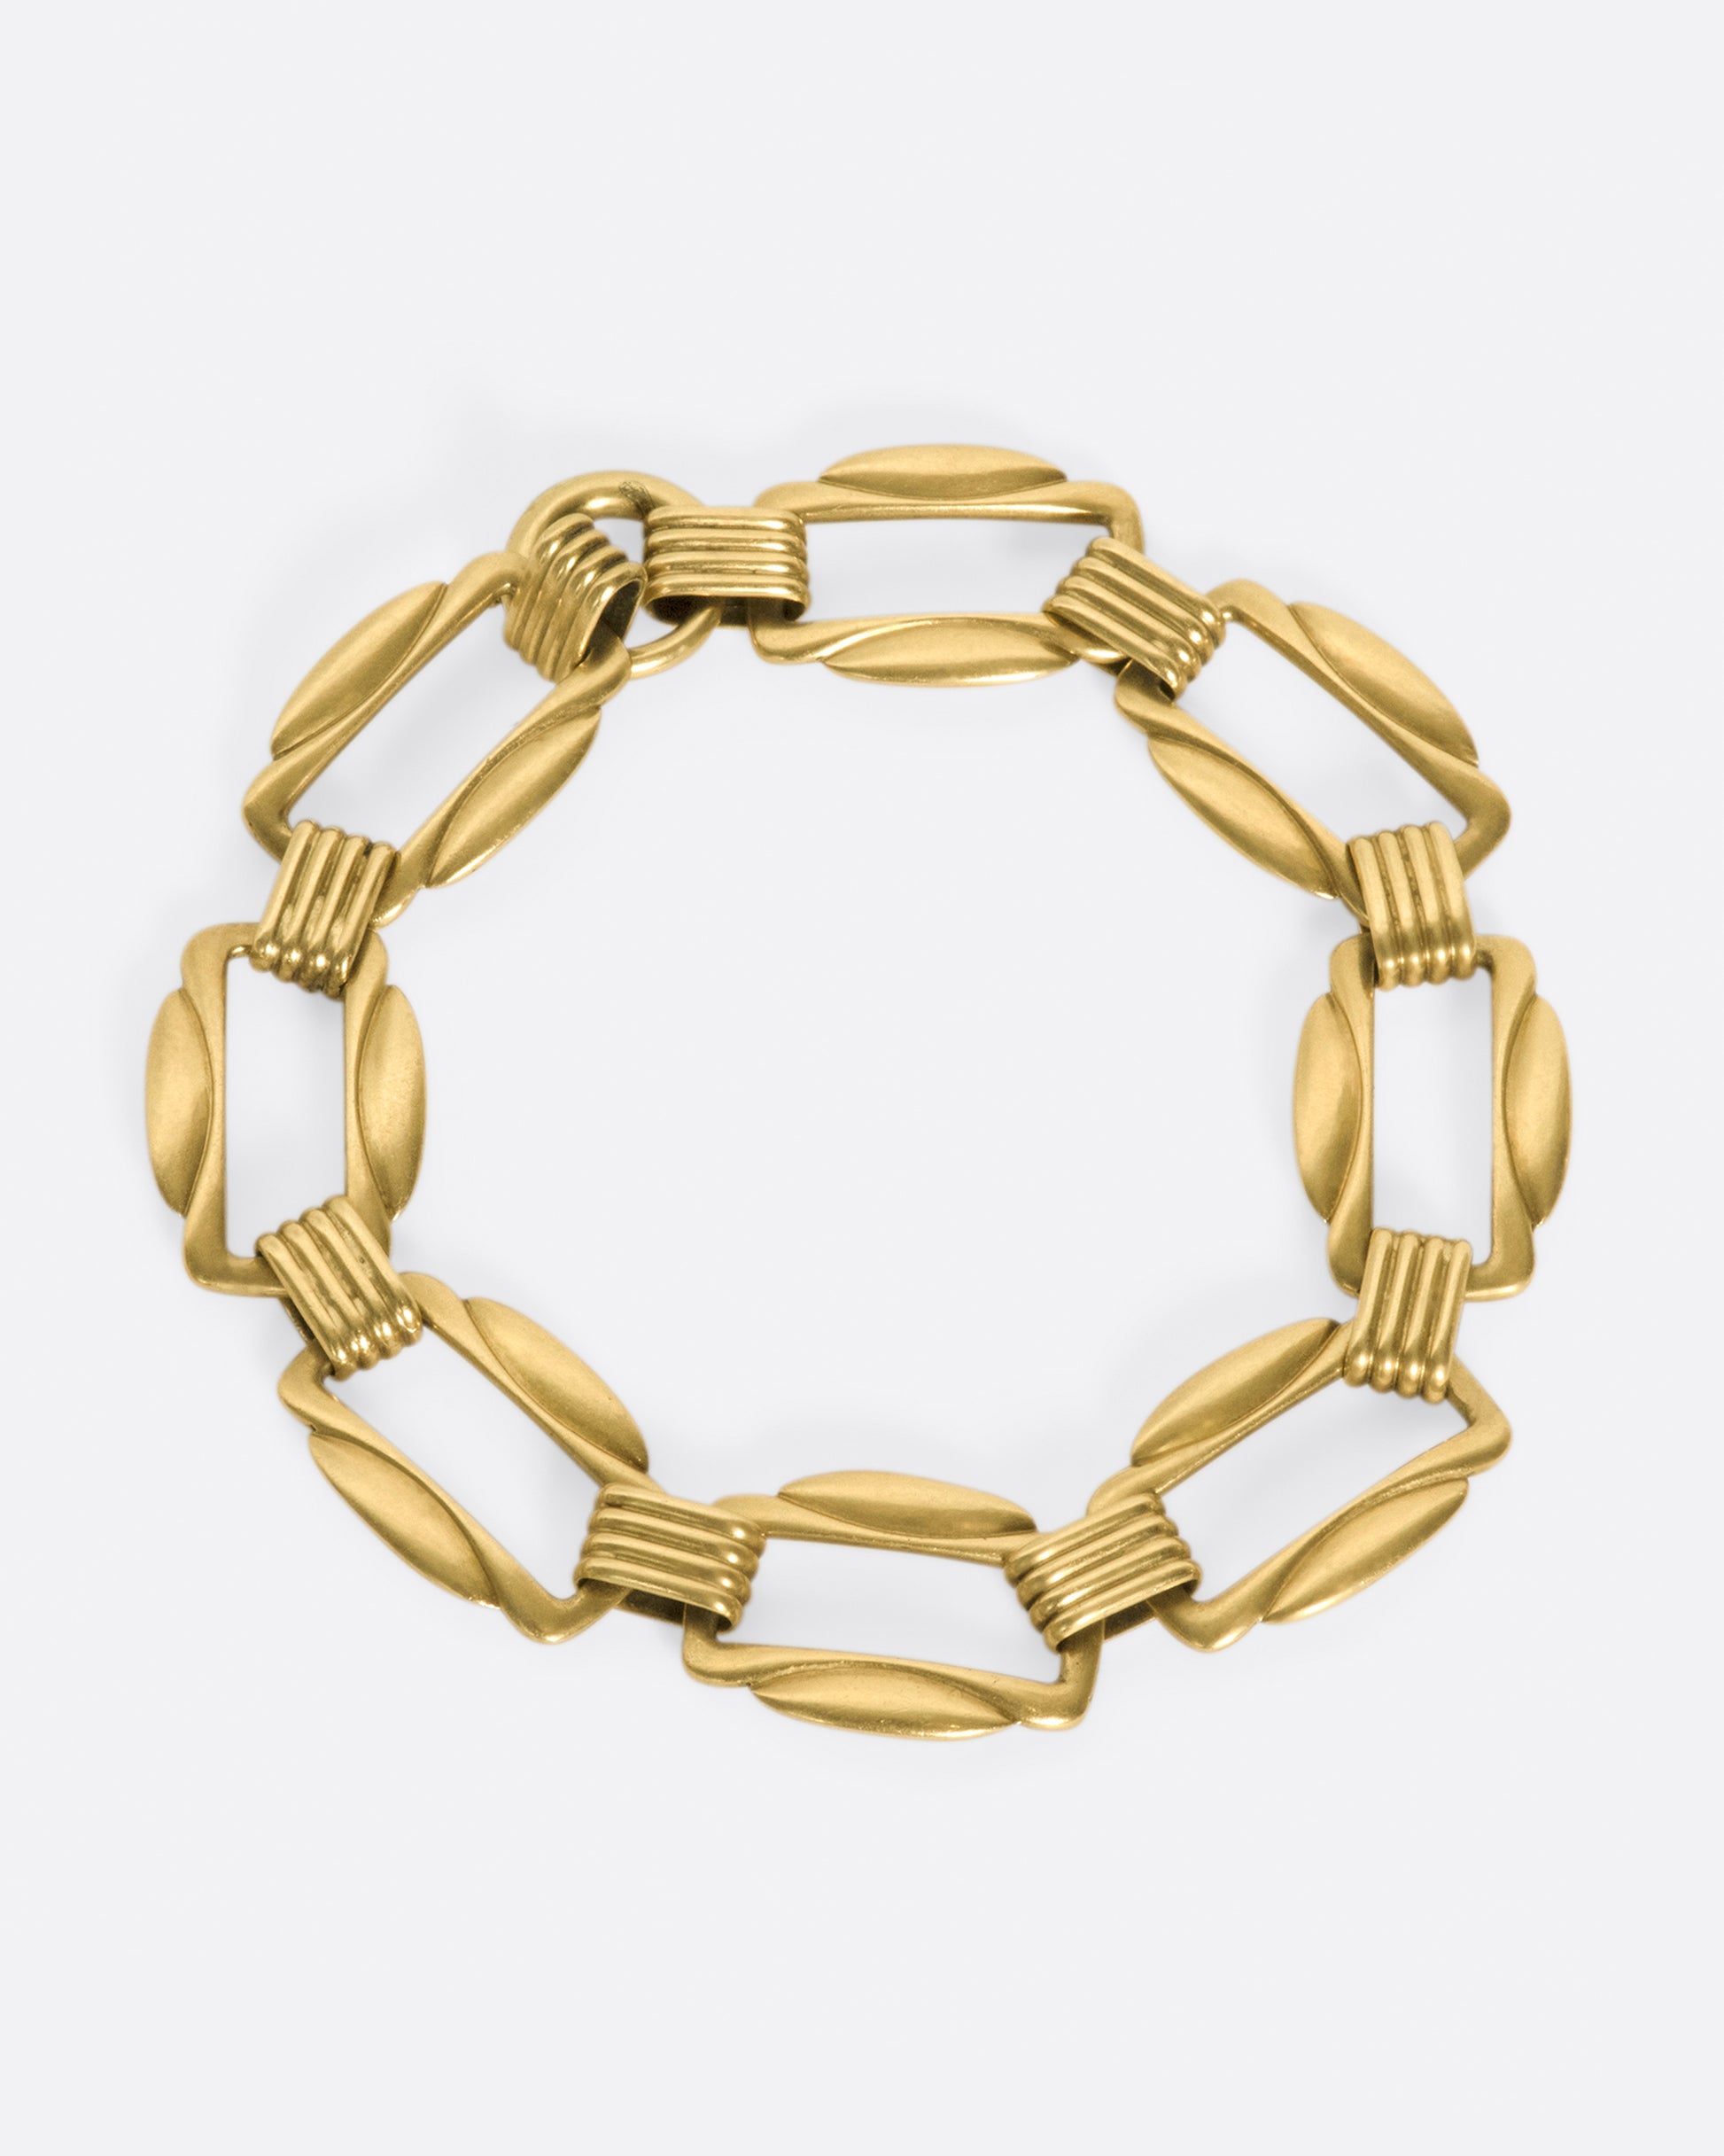 The clasp on this bracelet is hidden amongst its architectural links.